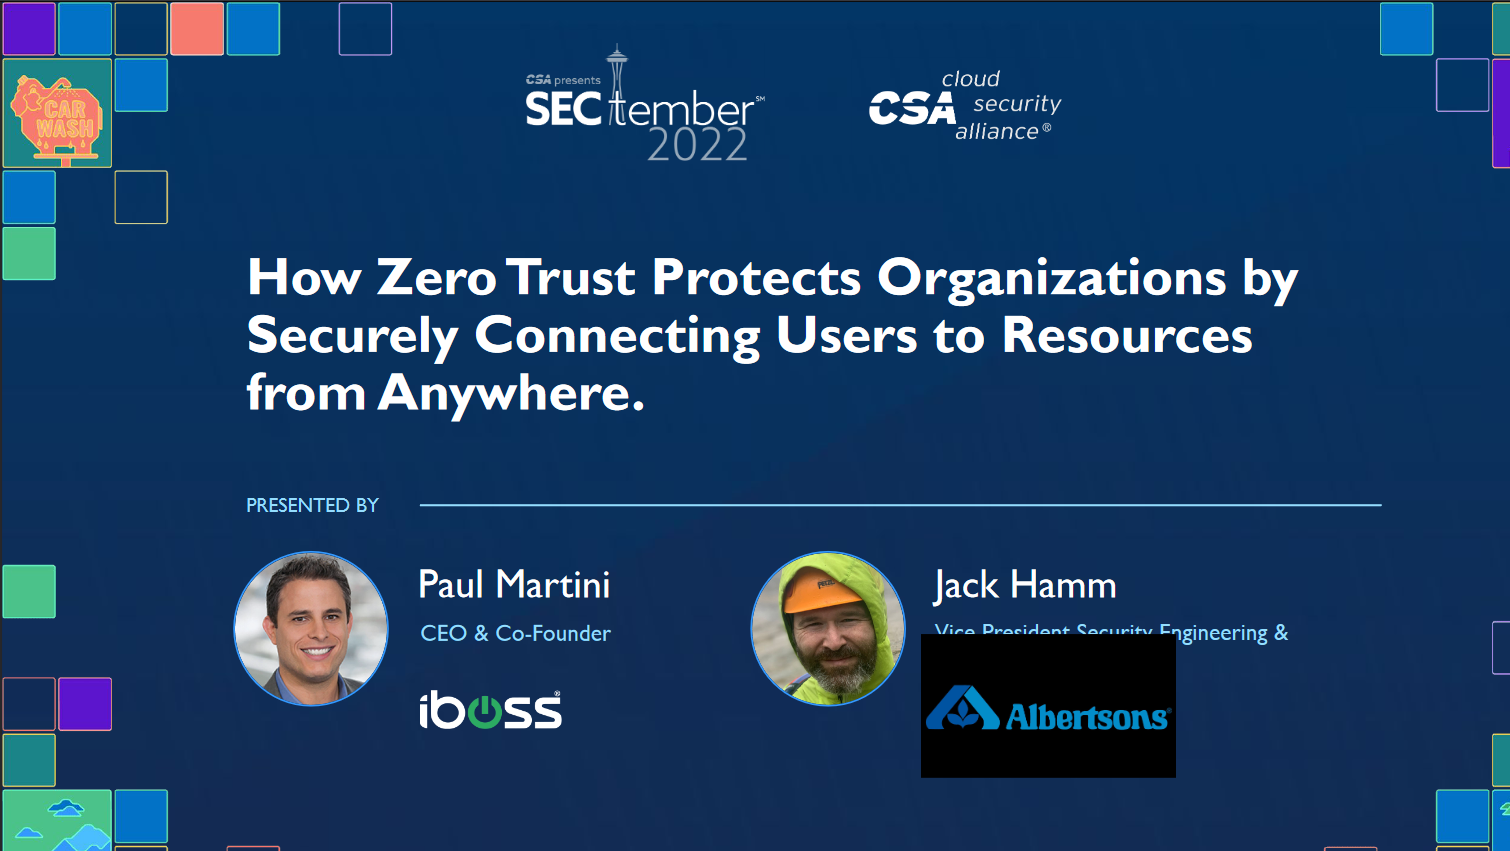 An Executive View on How Zero Trust Protects Organizations by Securely Connecting Users to Resources from Anywhere